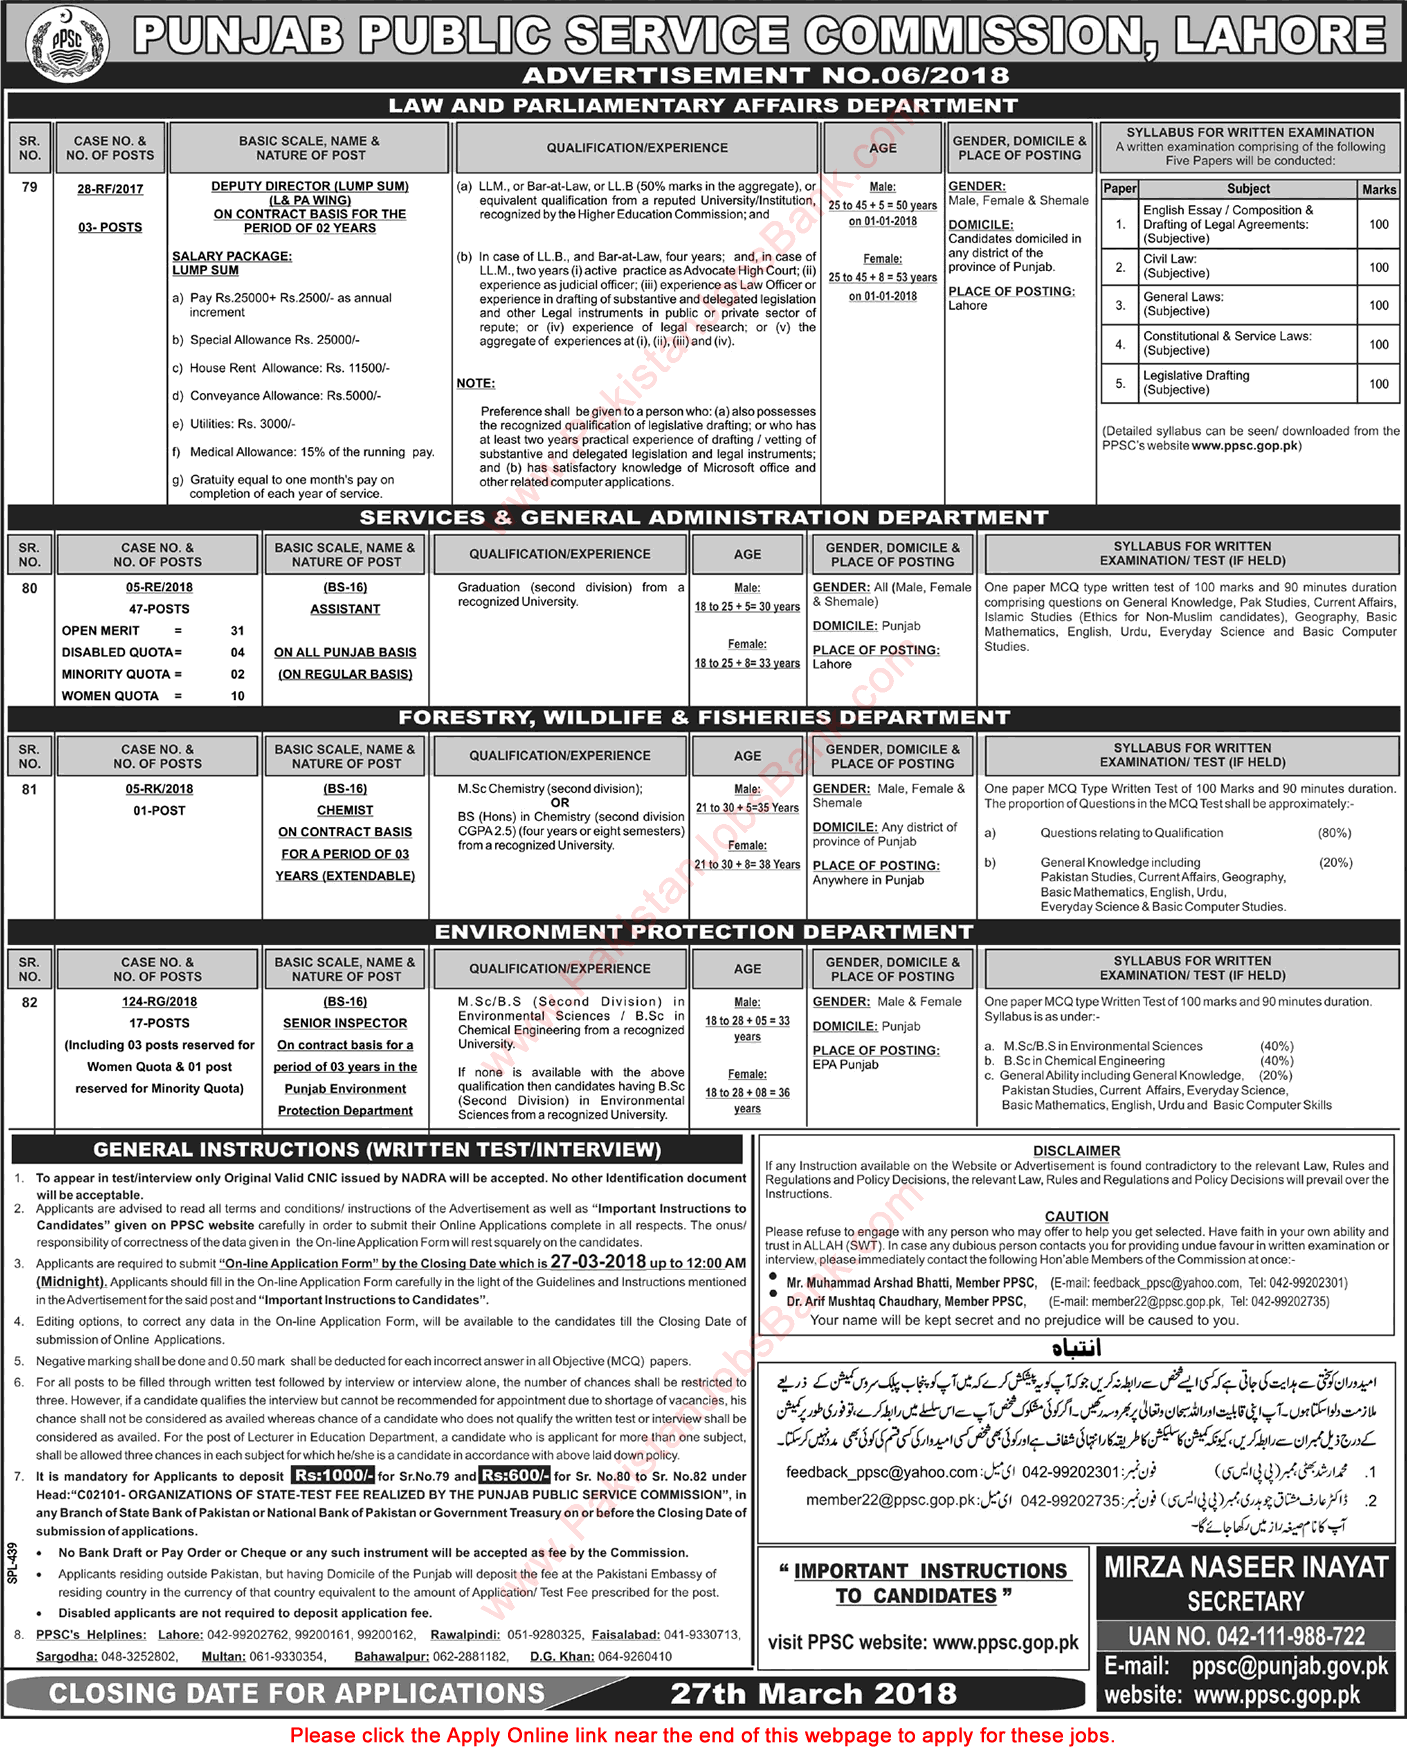 PPSC Jobs March 2018 Apply Online Consolidated Advertisement No 06/2018 Latest